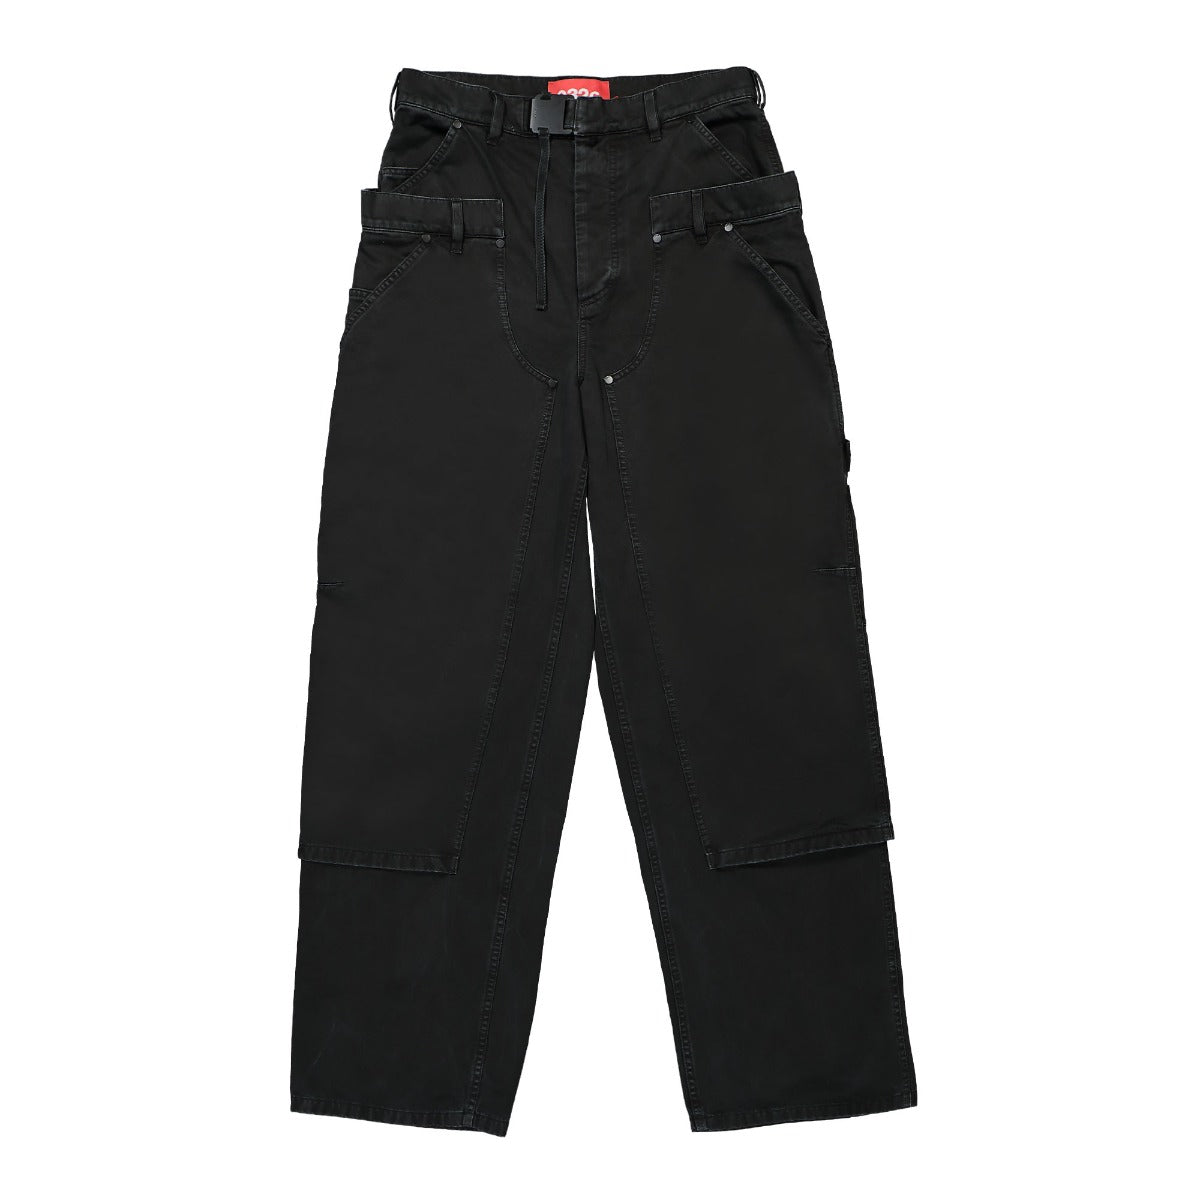 'Double Shift' Utility Trousers